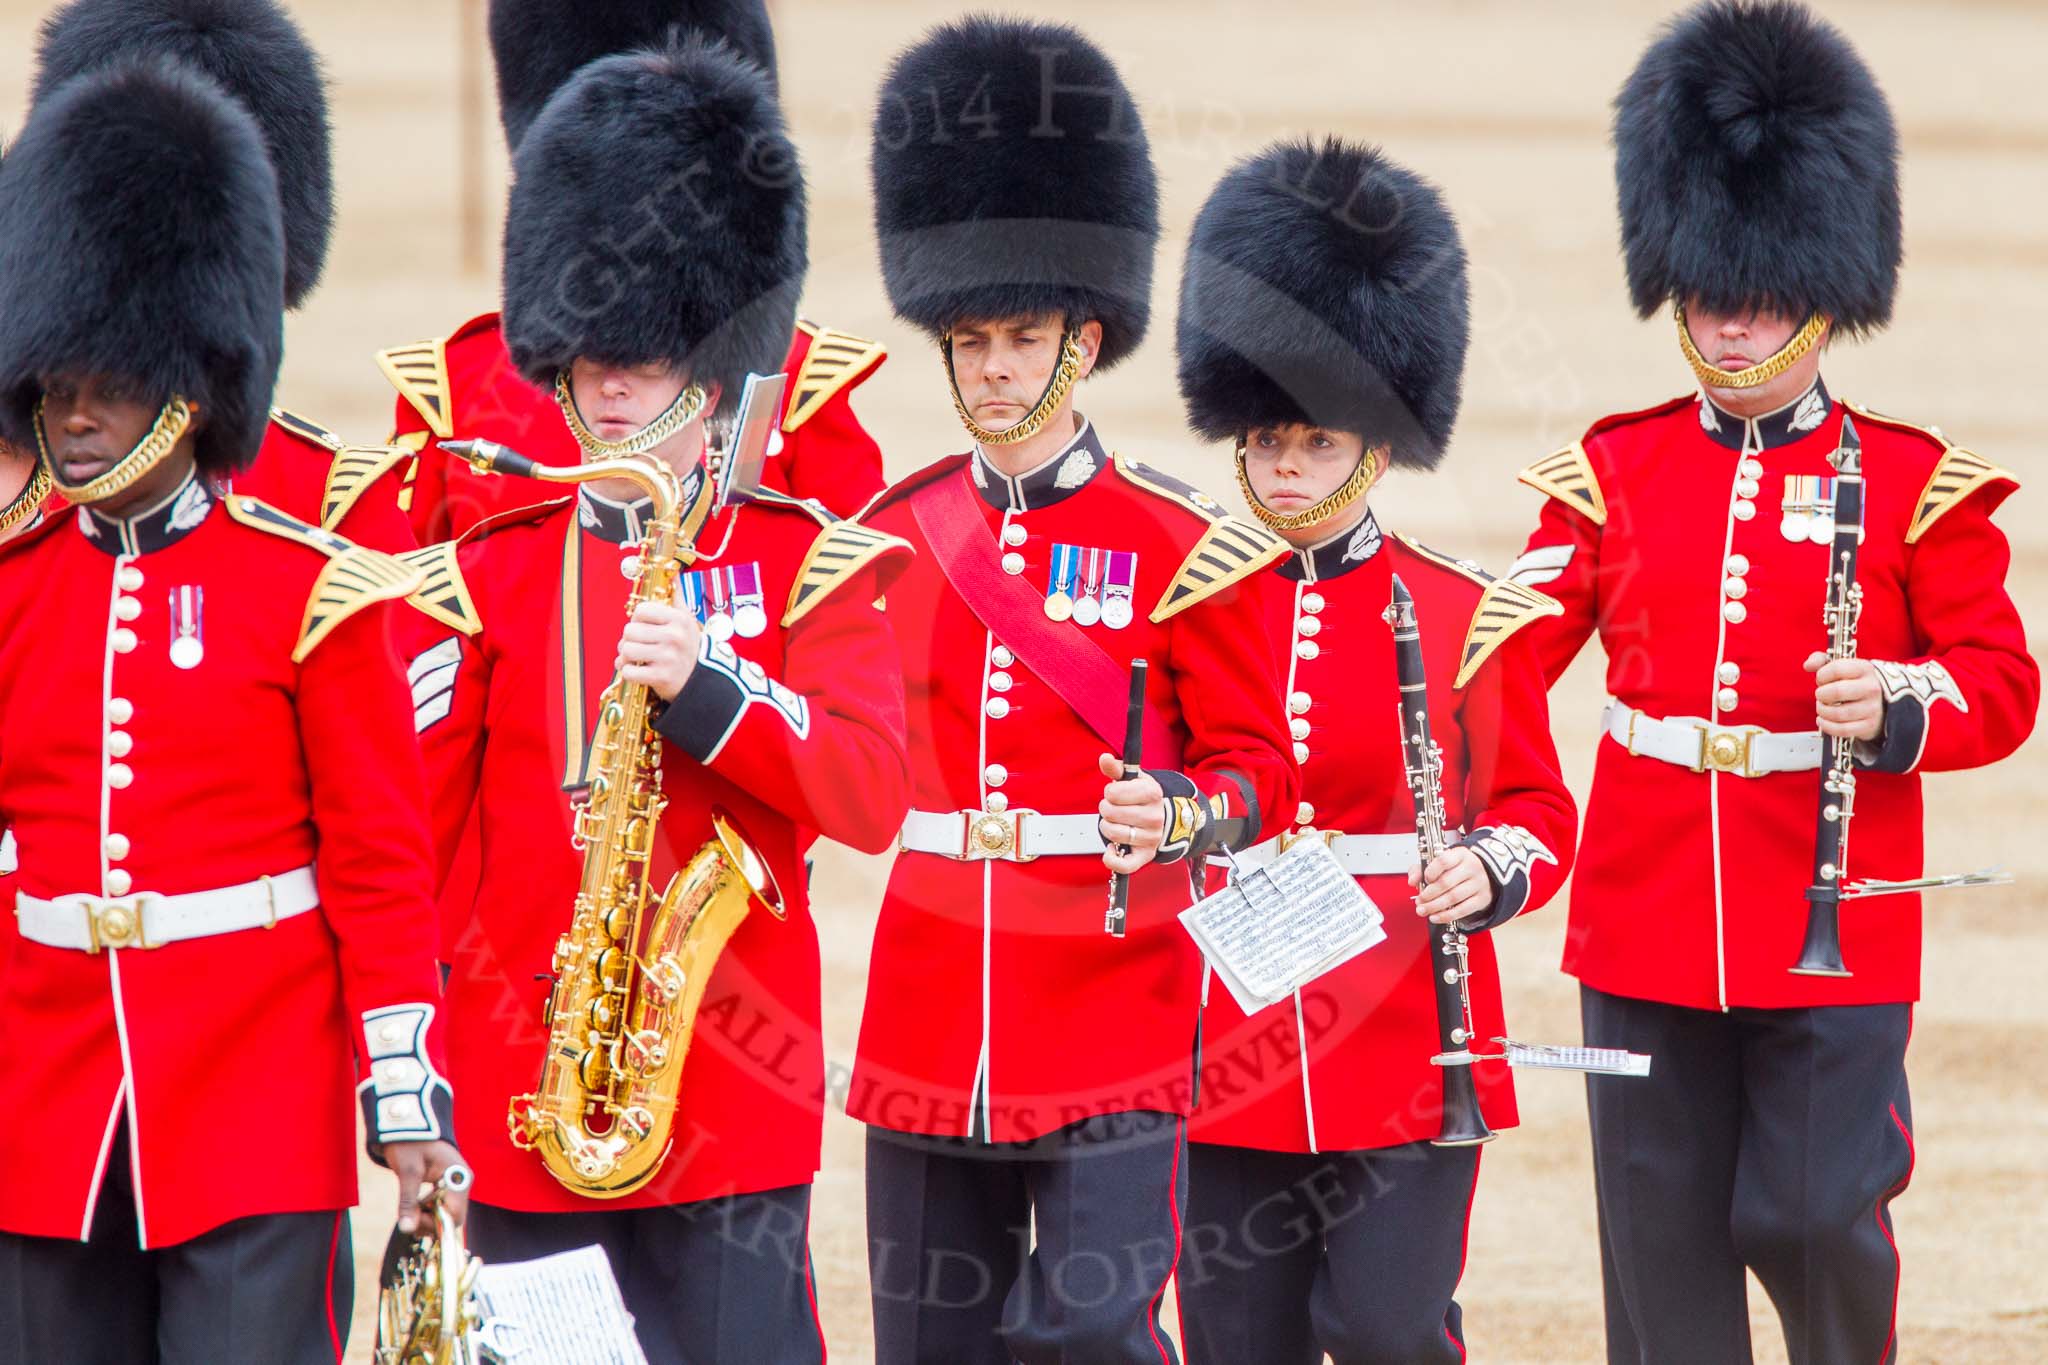 Trooping the Colour 2014.
Horse Guards Parade, Westminster,
London SW1A,

United Kingdom,
on 14 June 2014 at 10:25, image #142